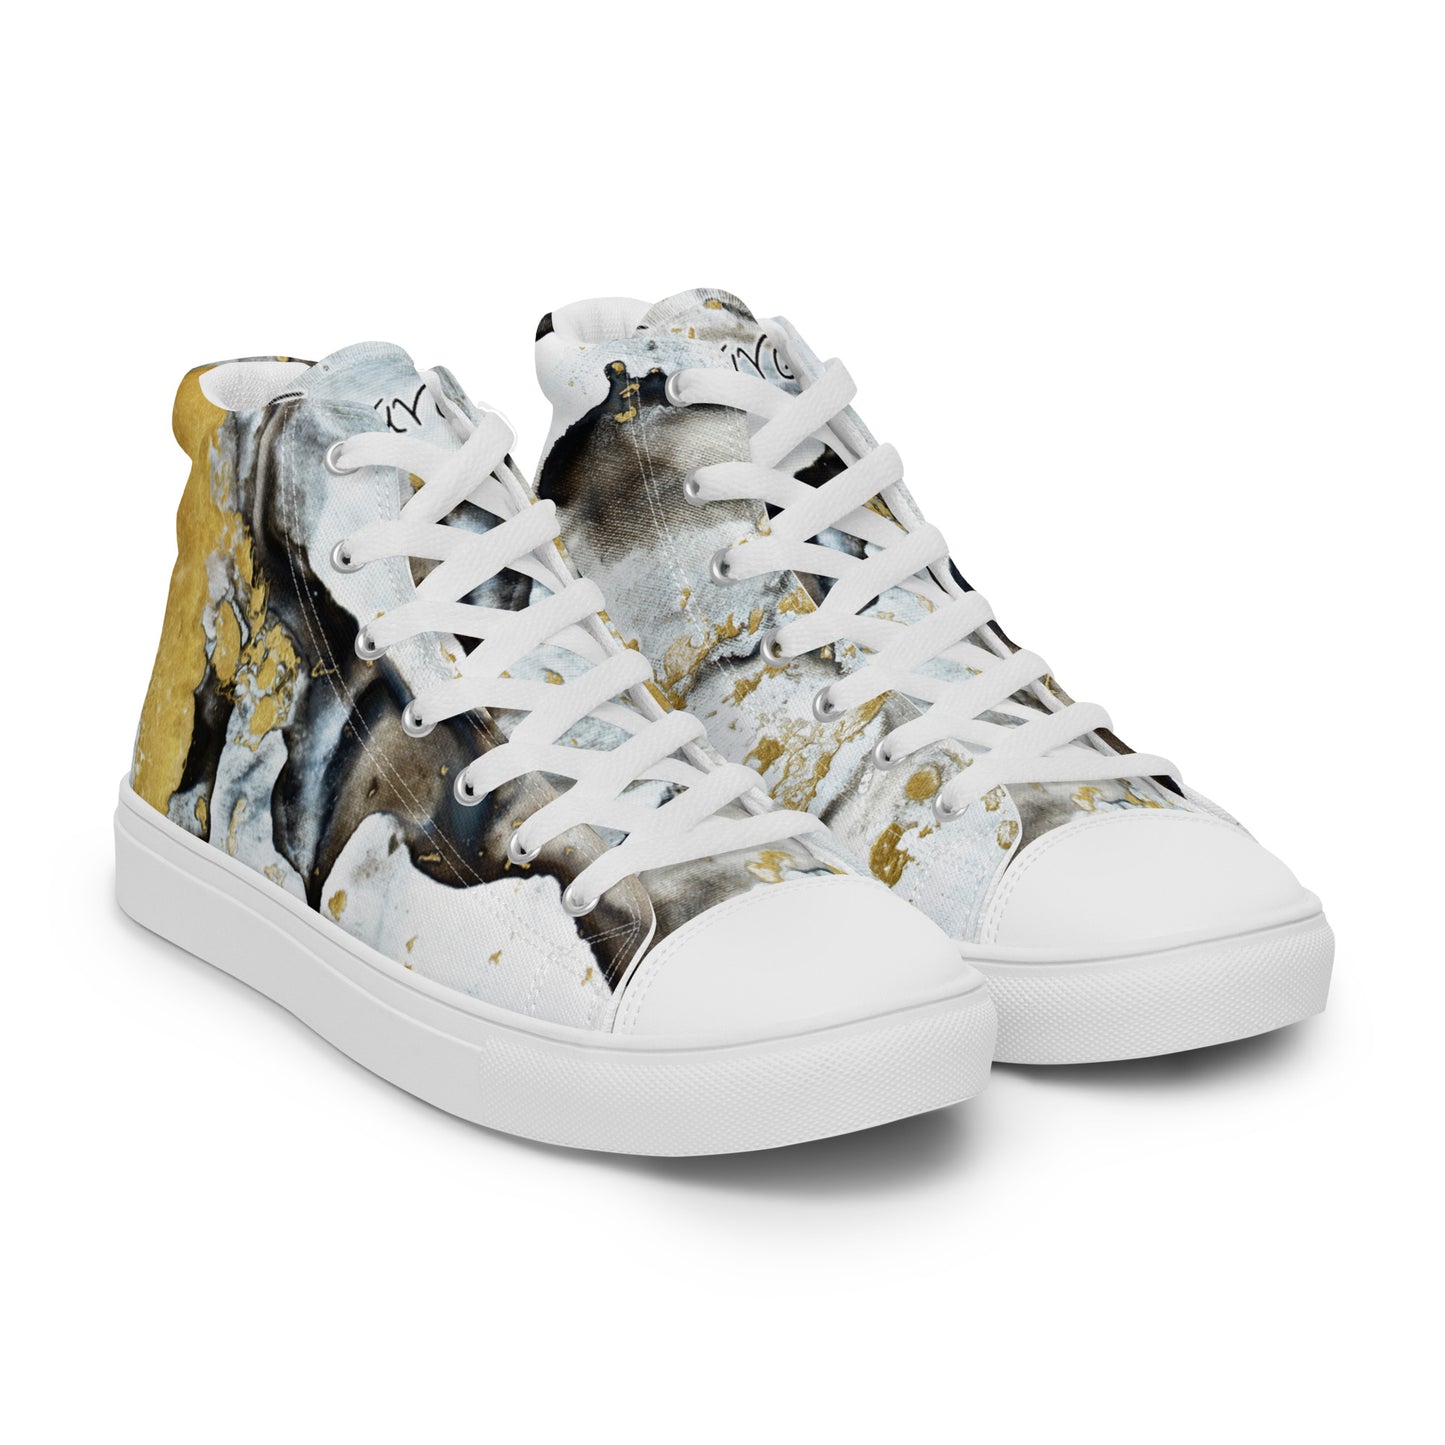 Men’s high top canvas shoes - Black and white design